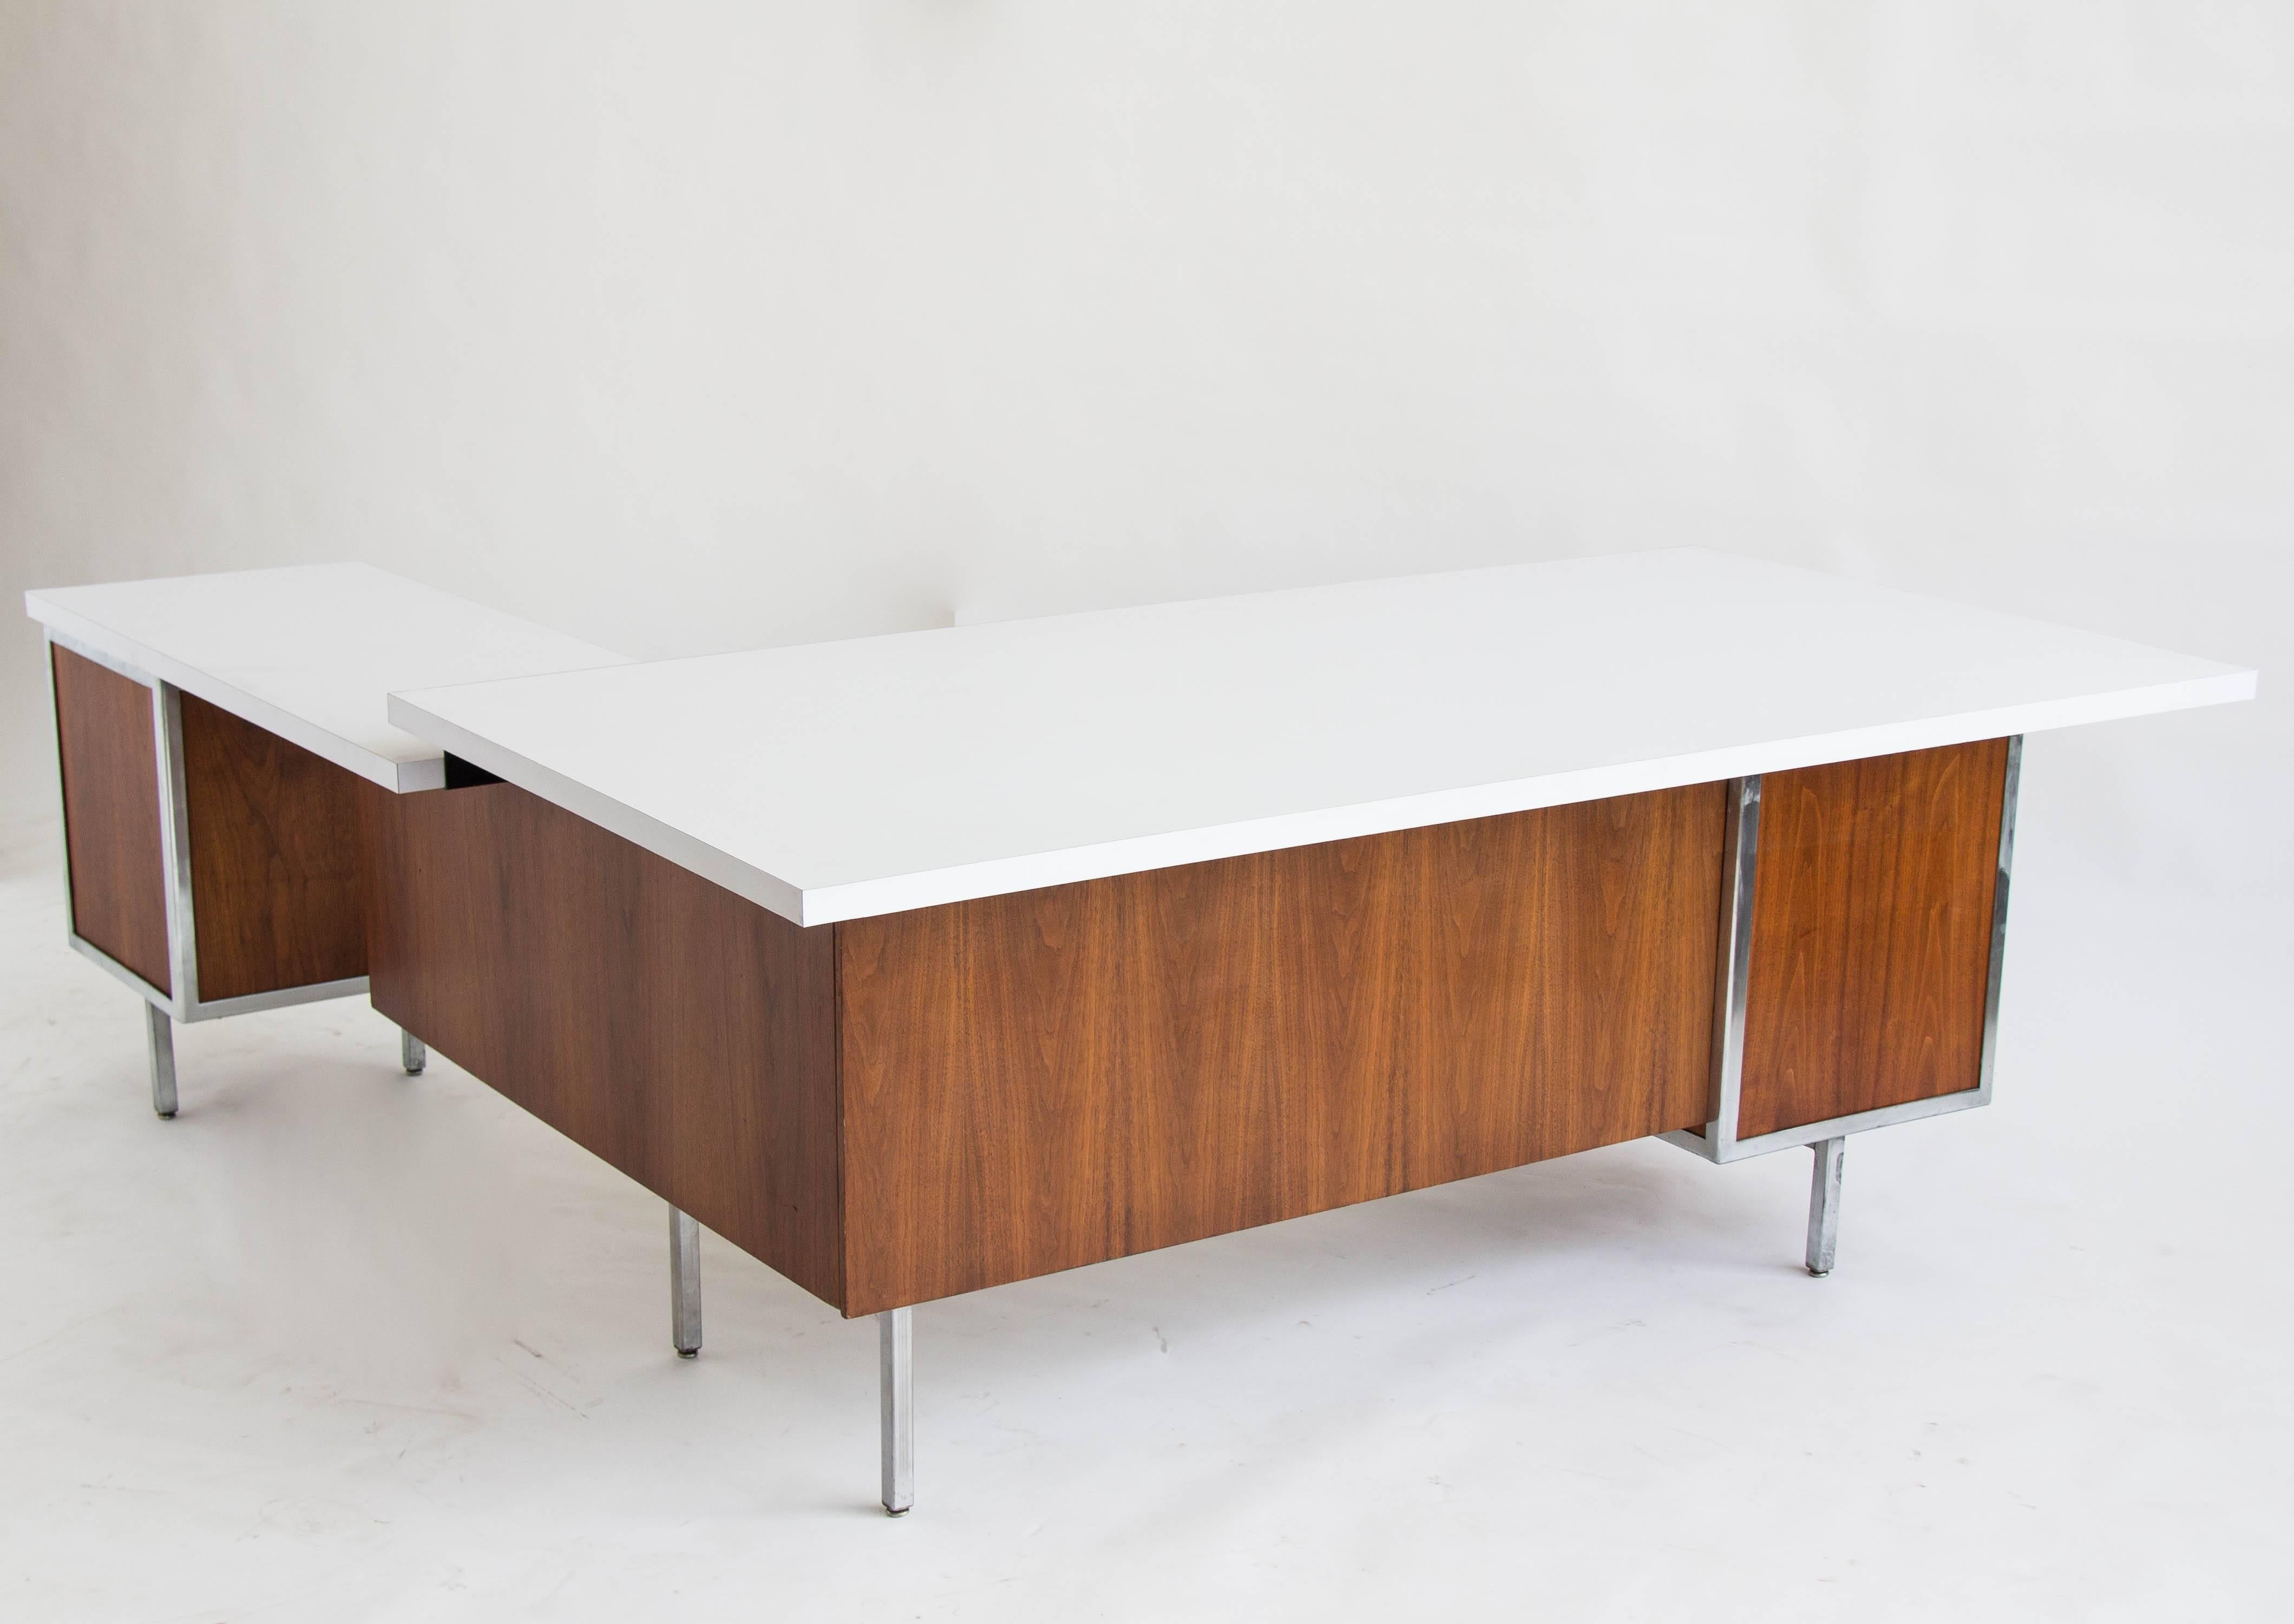 A rare desk and return set by Robert John and manufactured by Knoll. Desk has three stacked drawers. Top drawer is marked with Knoll sticker of manufacture. The slightly lowered return has two drawers, one shallow that locks with a key and one